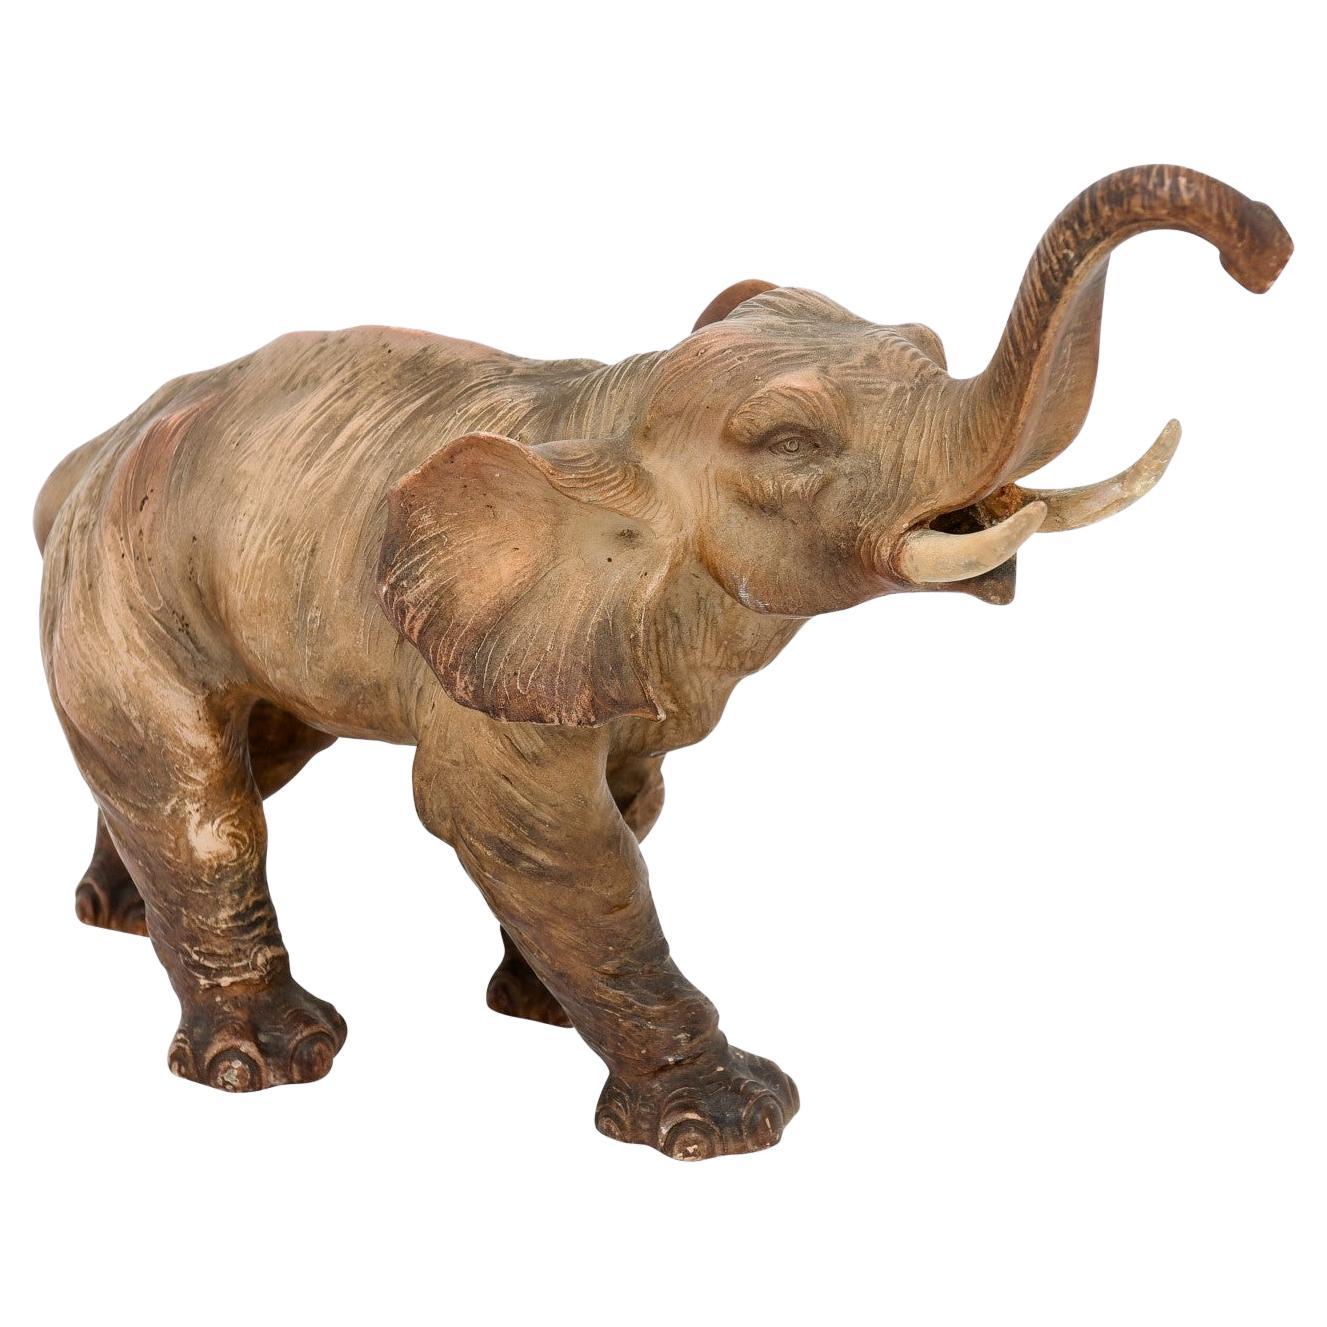 French 19th Century Terracotta Sculpture Depicting a Walking Asian Elephant For Sale